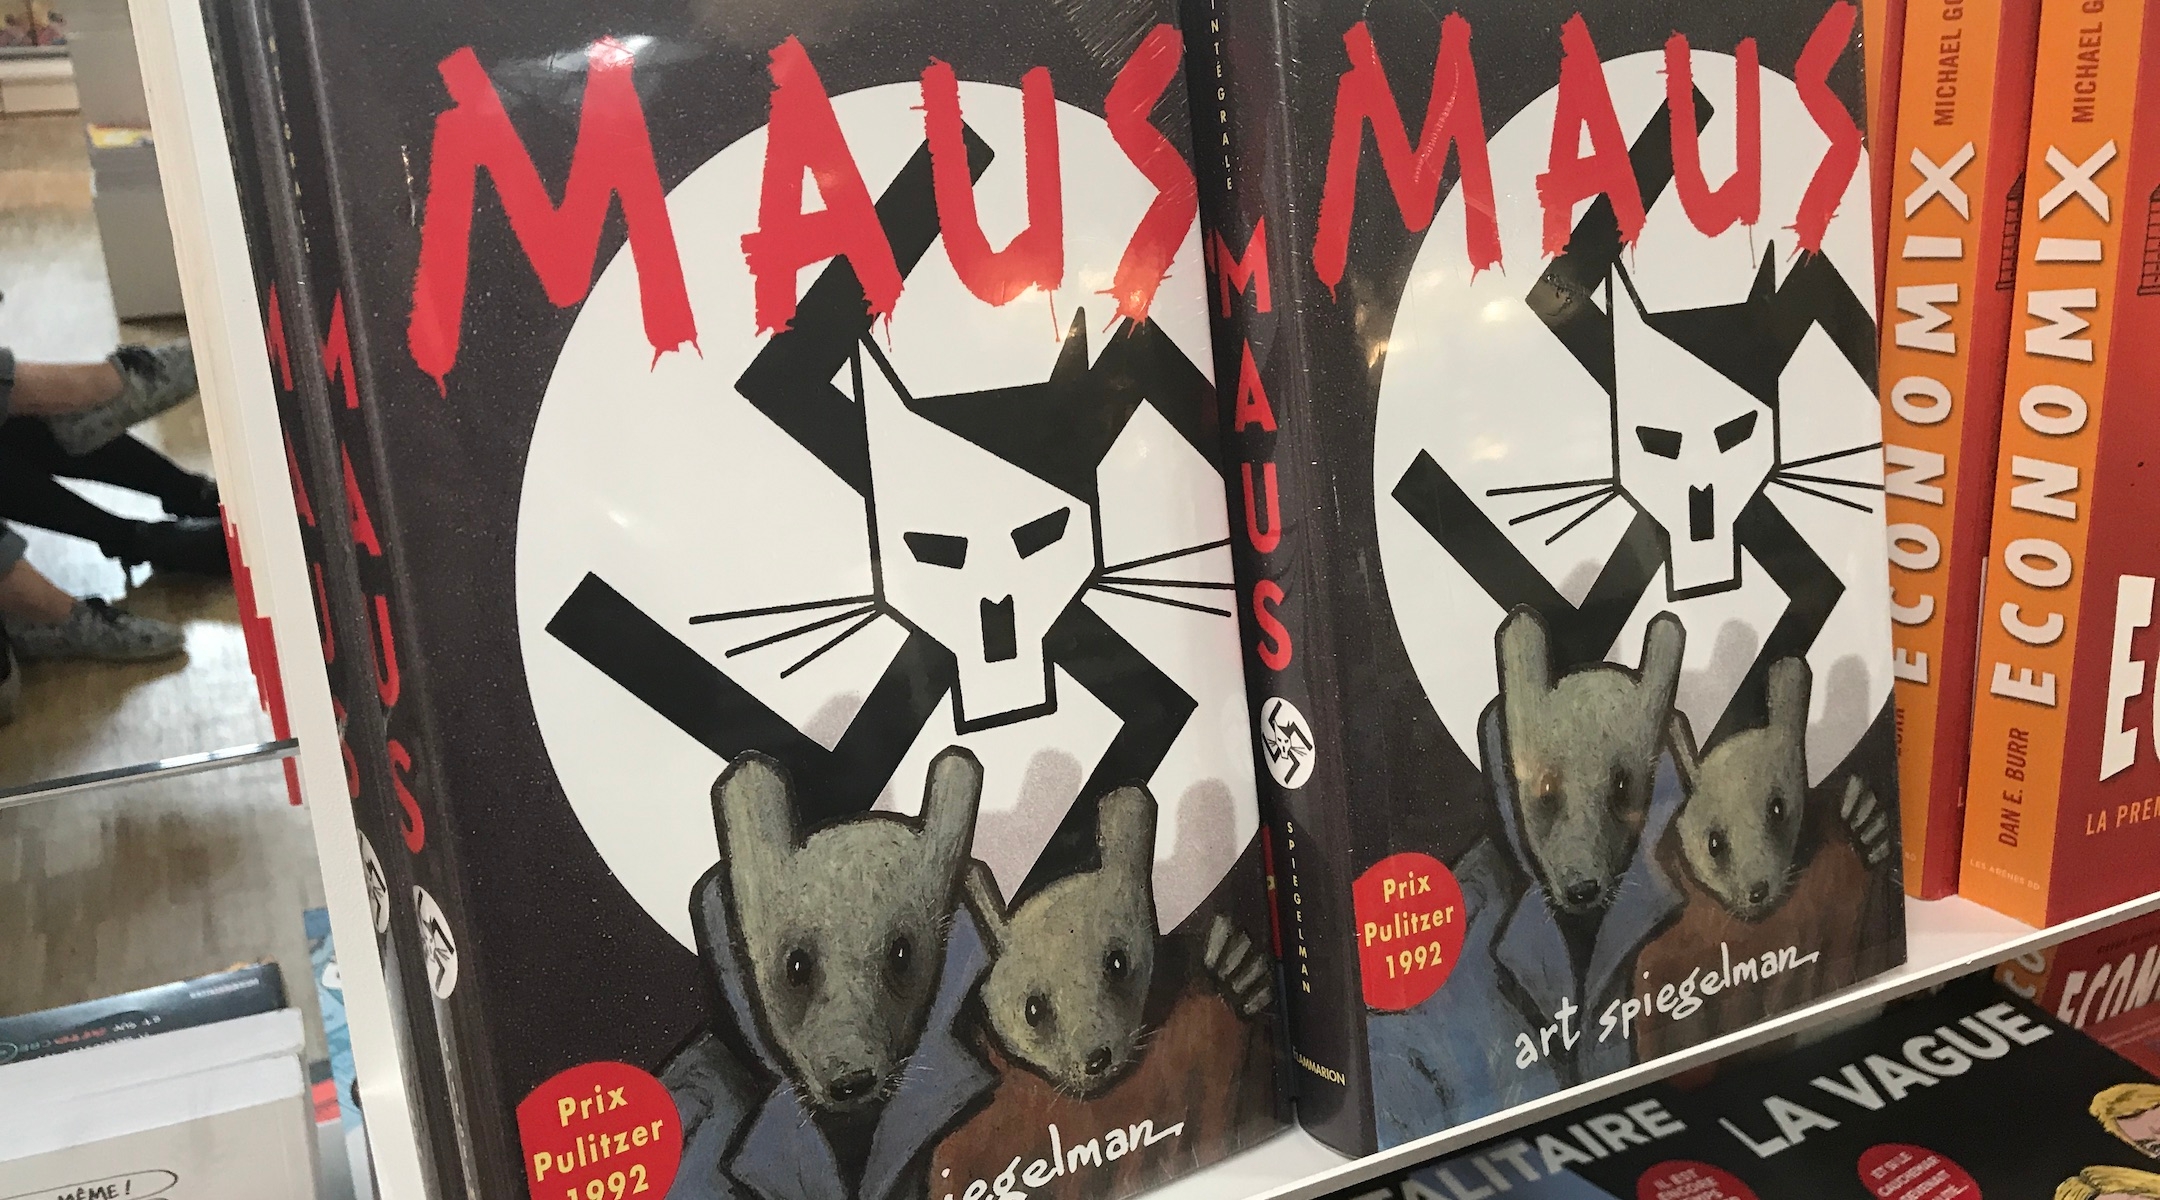 Art Spiegelman’s graphic novel “Maus” on sale at a French bookstore in 2017. (ActuaLitté/Flickr Commons)